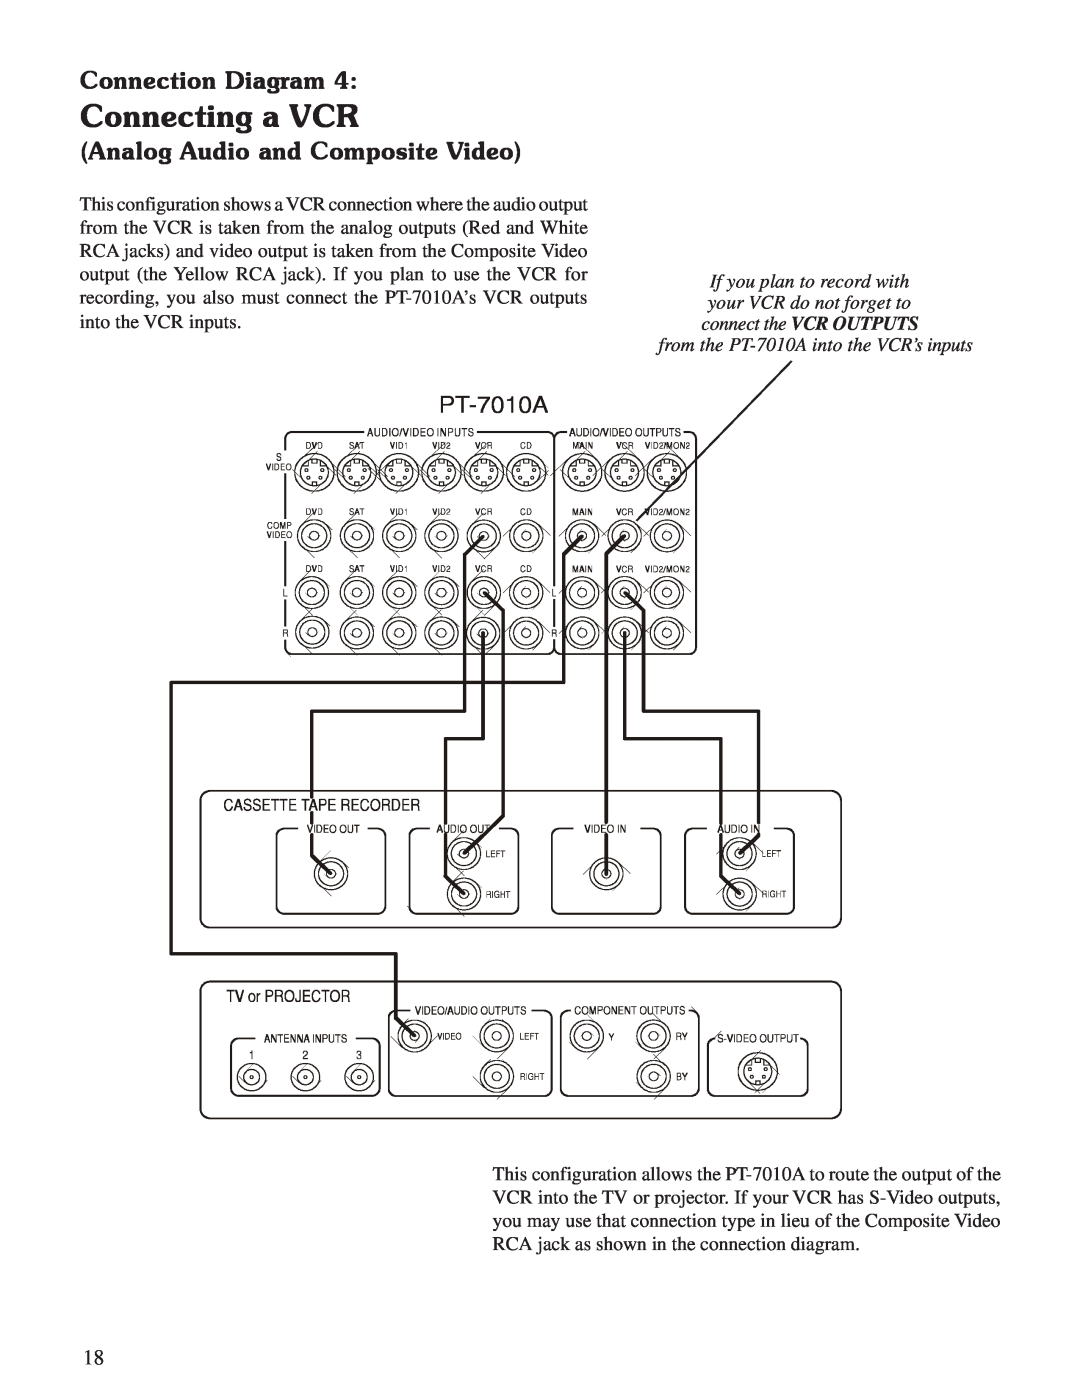 Sherbourn Technologies PT-7010A owner manual Connecting a VCR, Connection Diagram, Analog Audio and Composite Video 